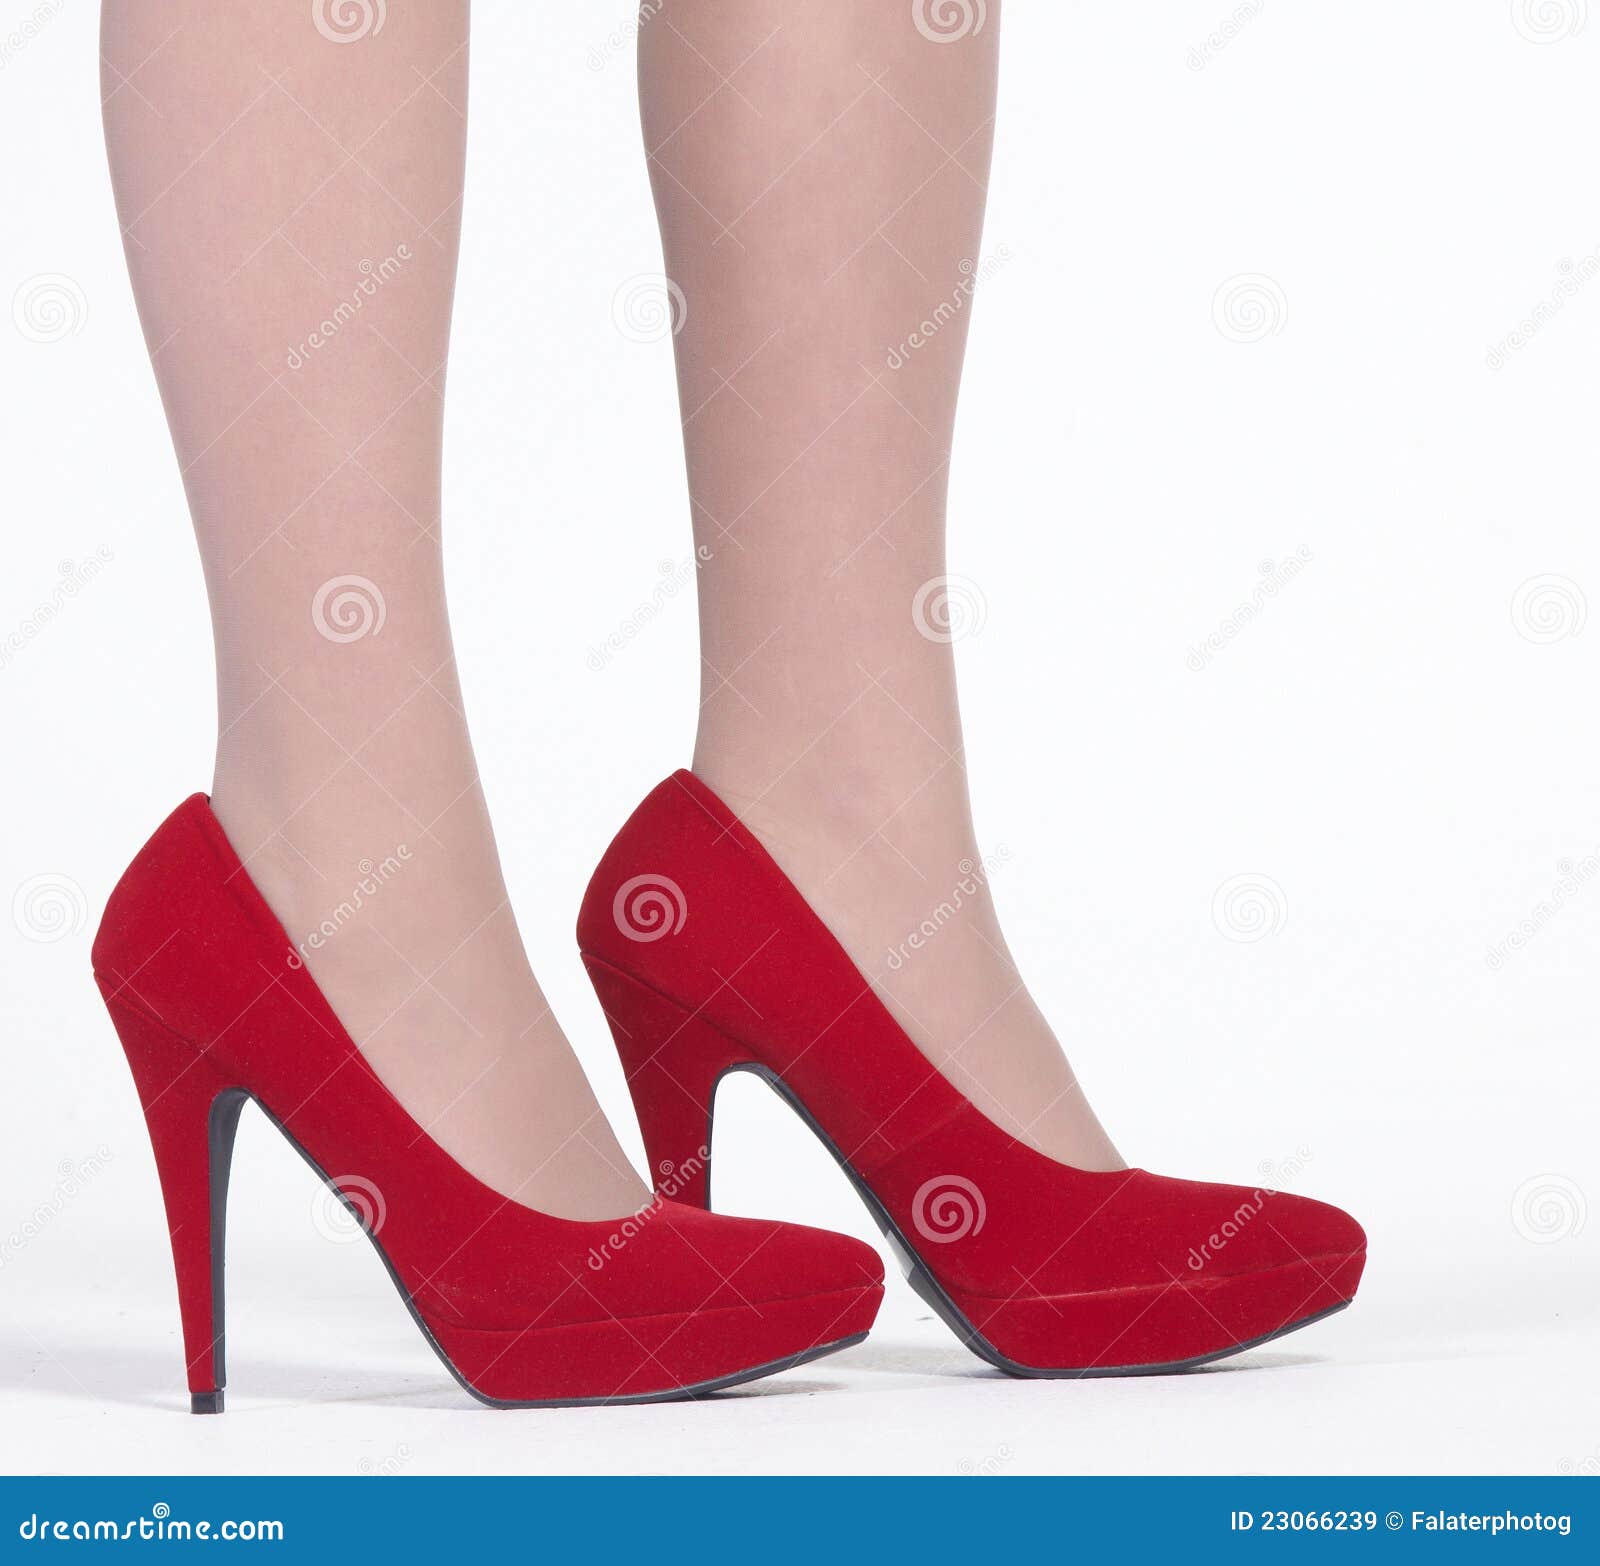 Spike On Black High Heel Shoes Stock Photo - Download Image Now